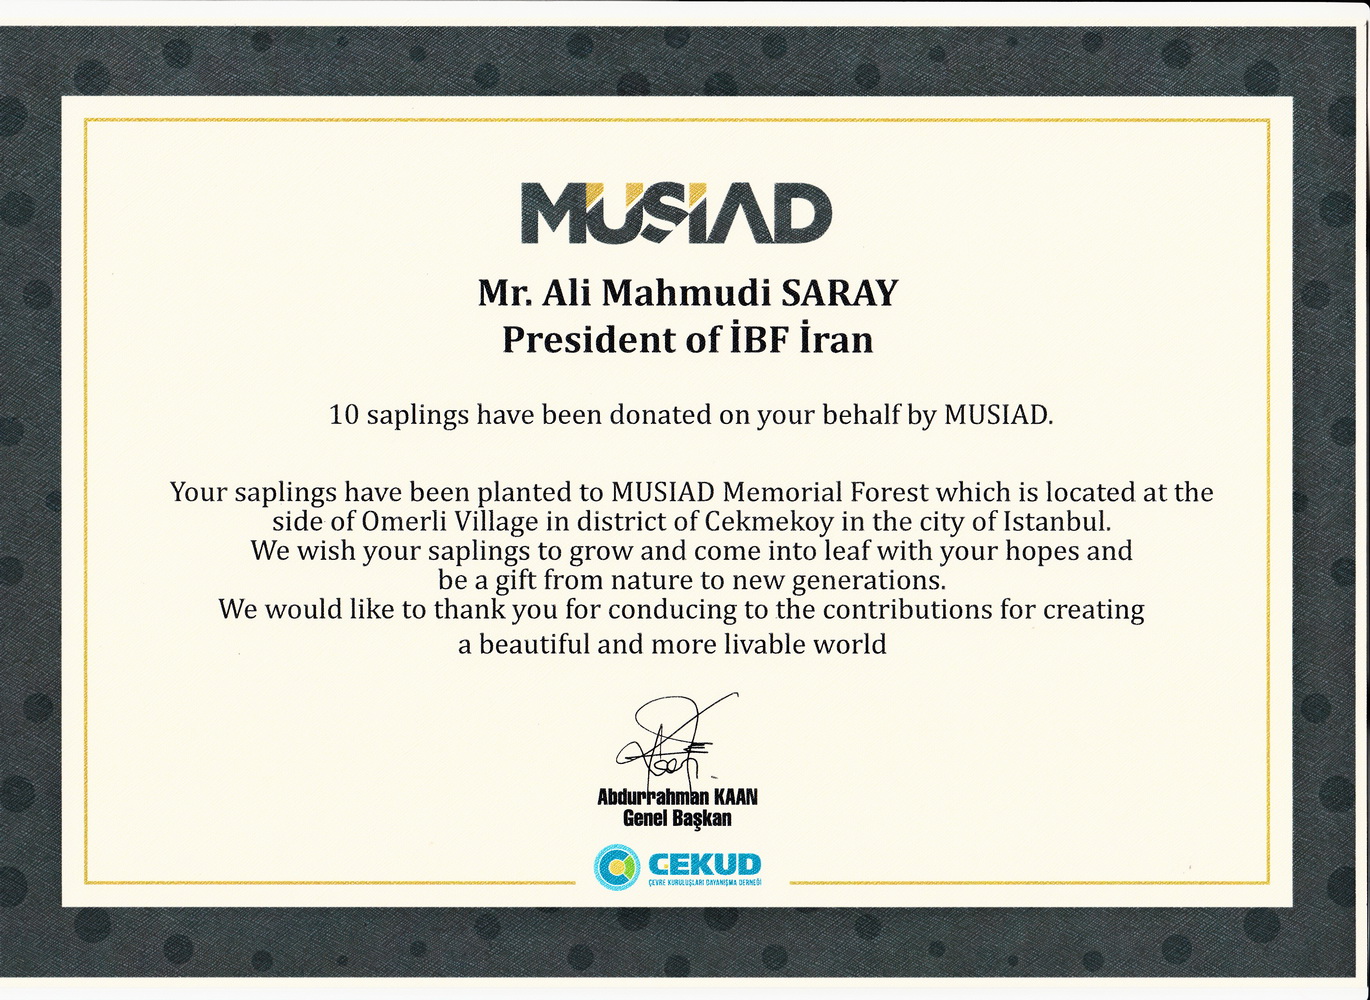  Ten  saplings have been donated on Iranian IBF by MUSIAD